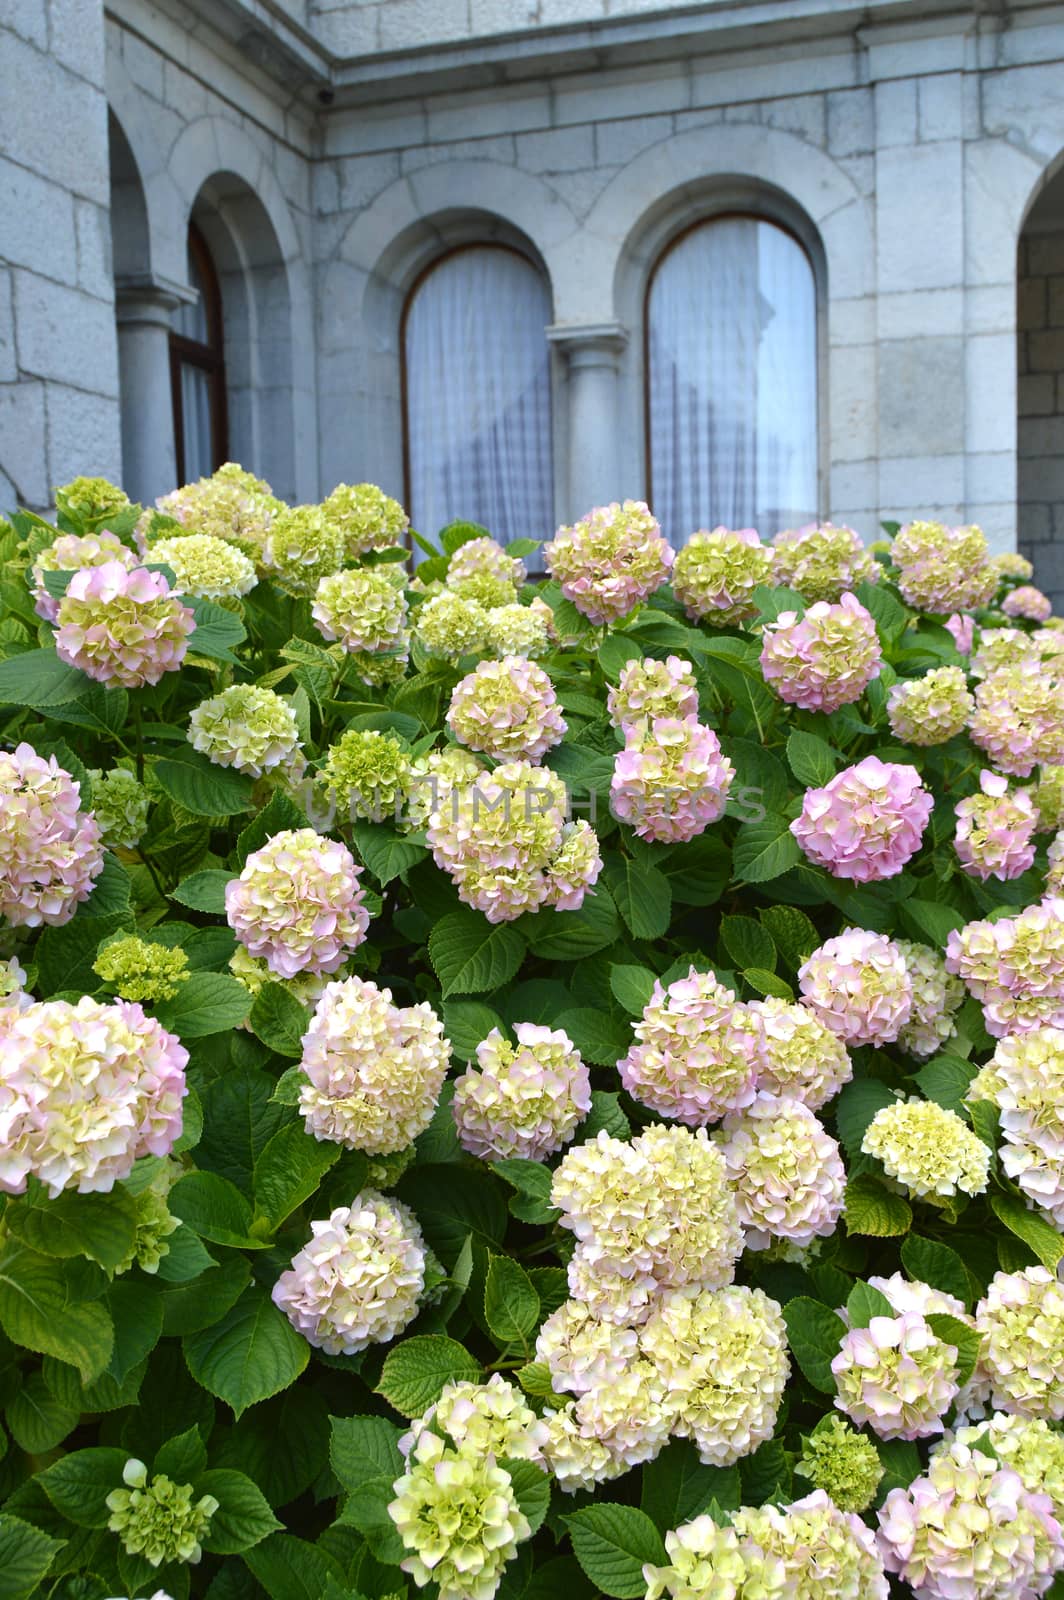 White hydrangea Bush blooms under the arched Windows of an old stone house in a romantic vintage style.